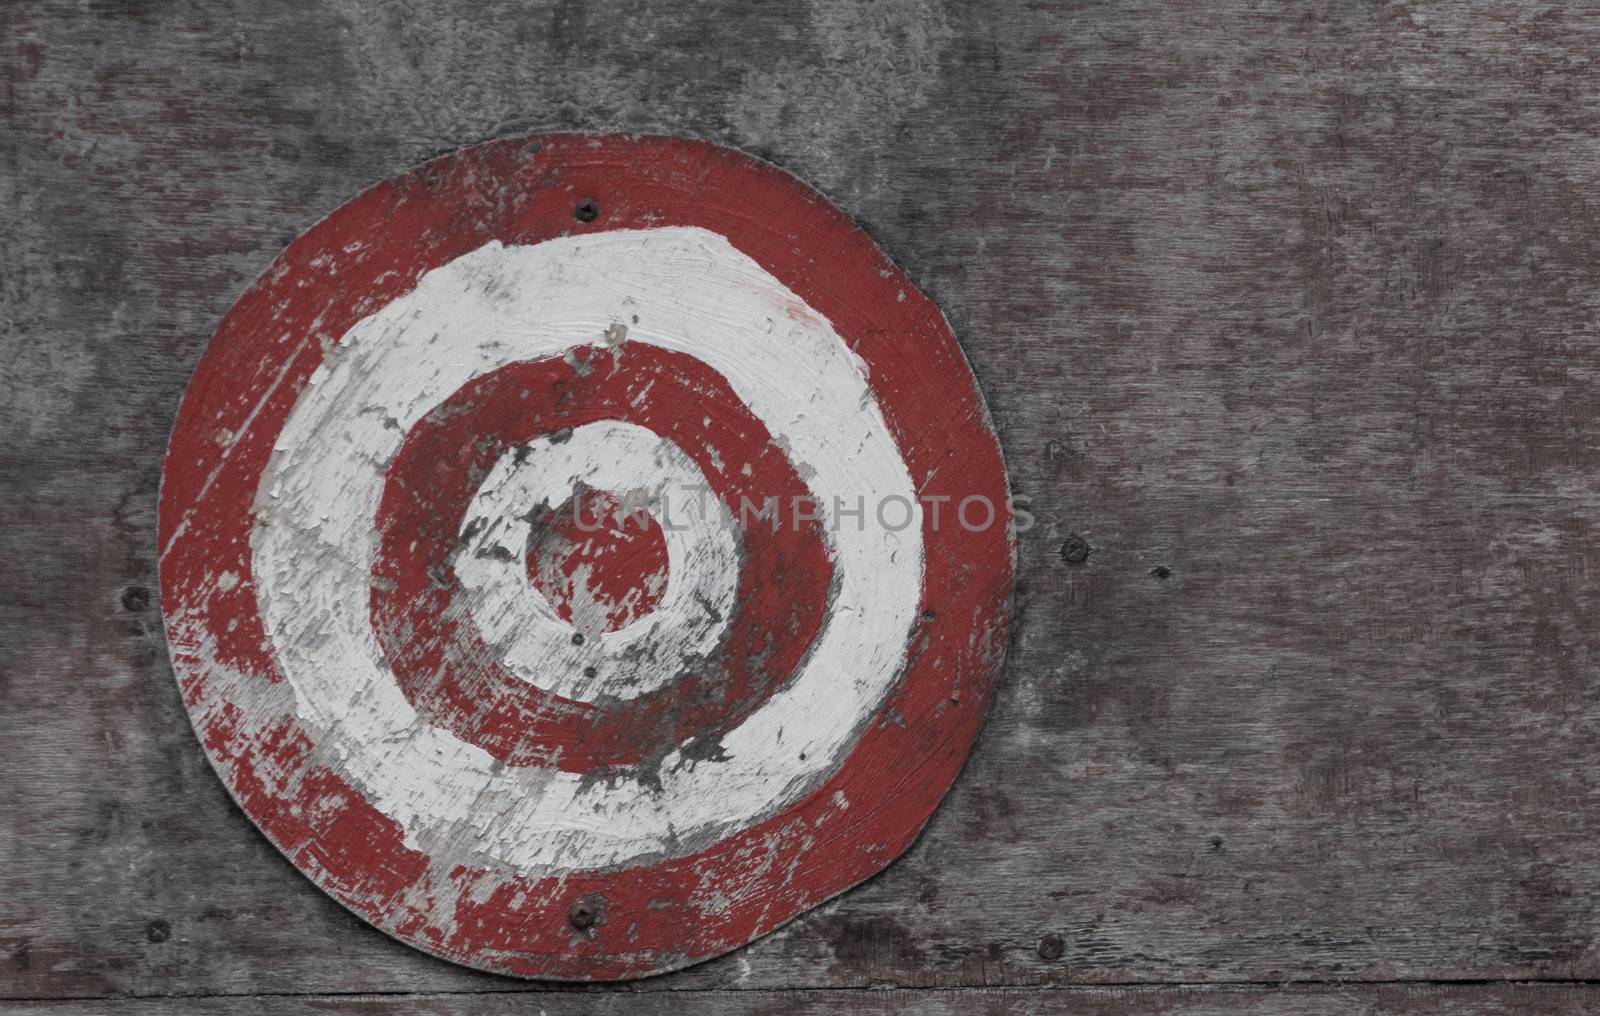 Picture of a red and white target on a wooden board